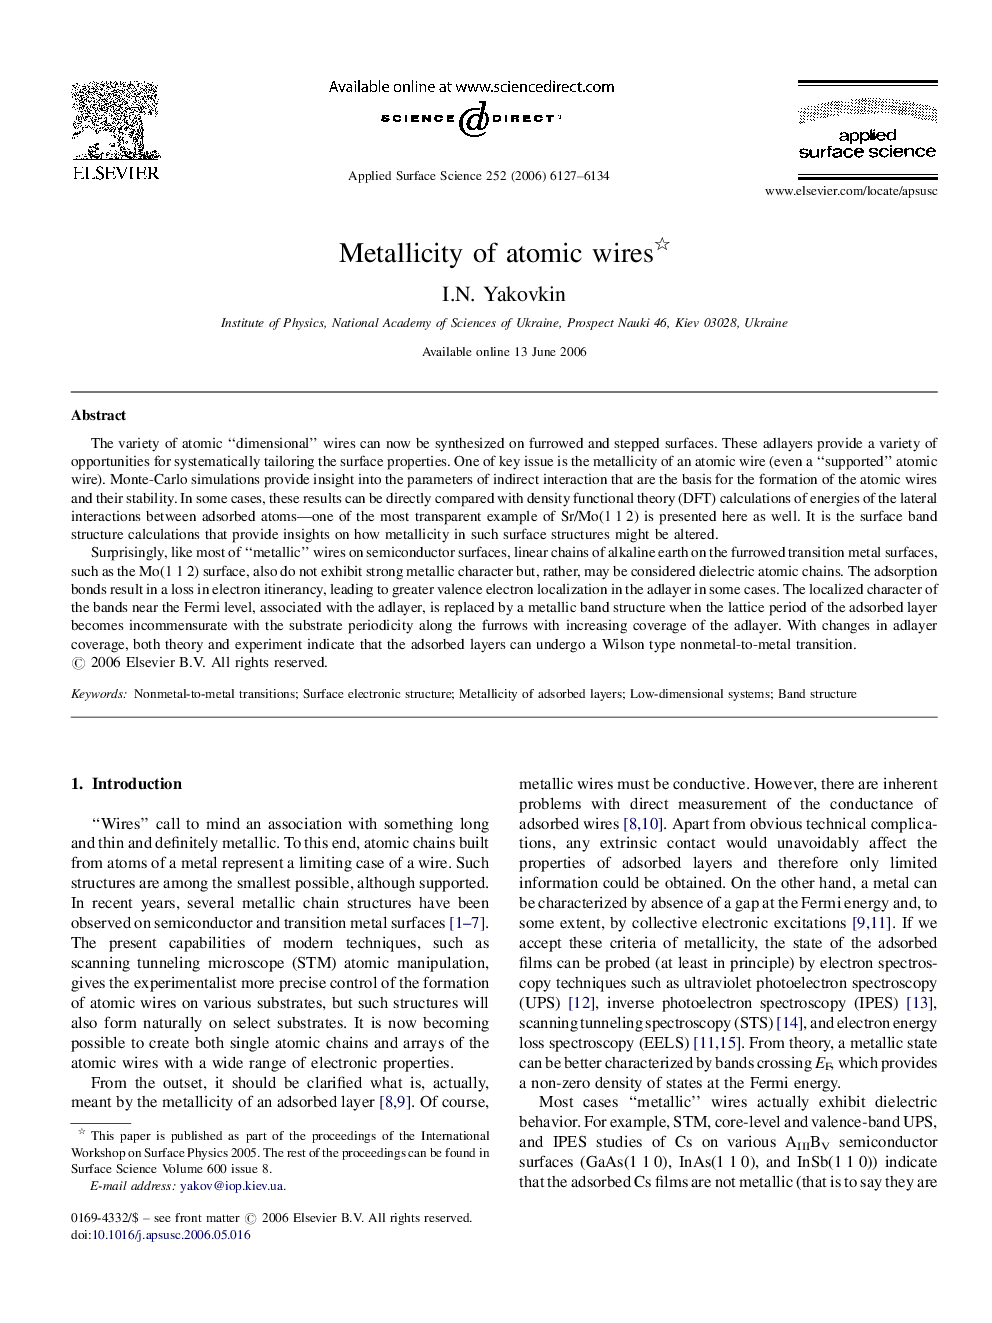 Metallicity of atomic wires